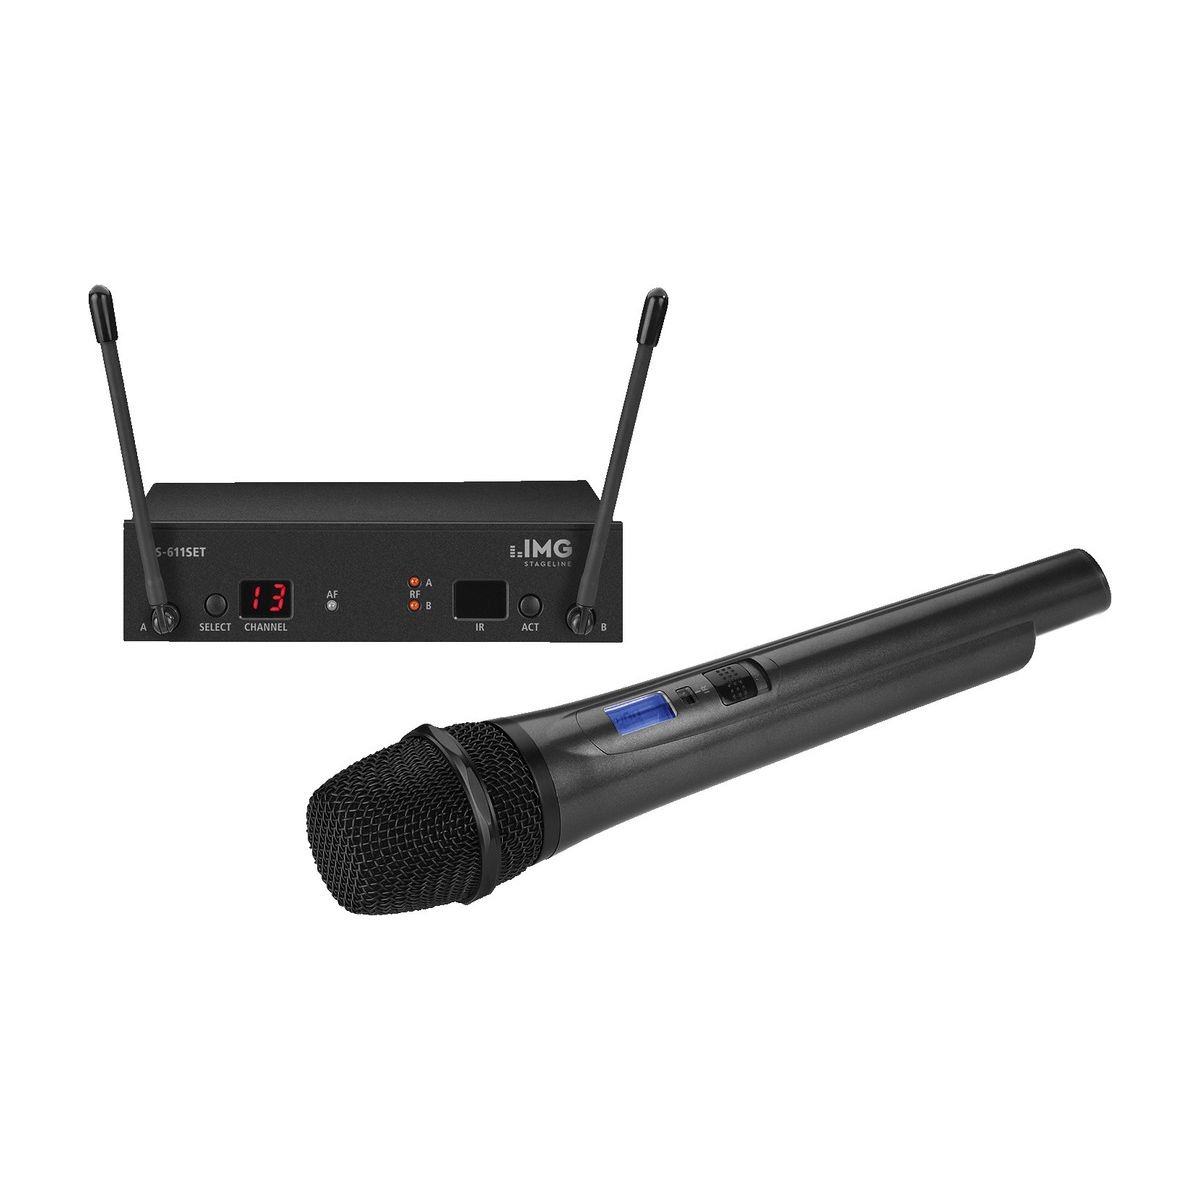 TXS-611SET | Multifrequency microphone system, 863-865 MHz-6324